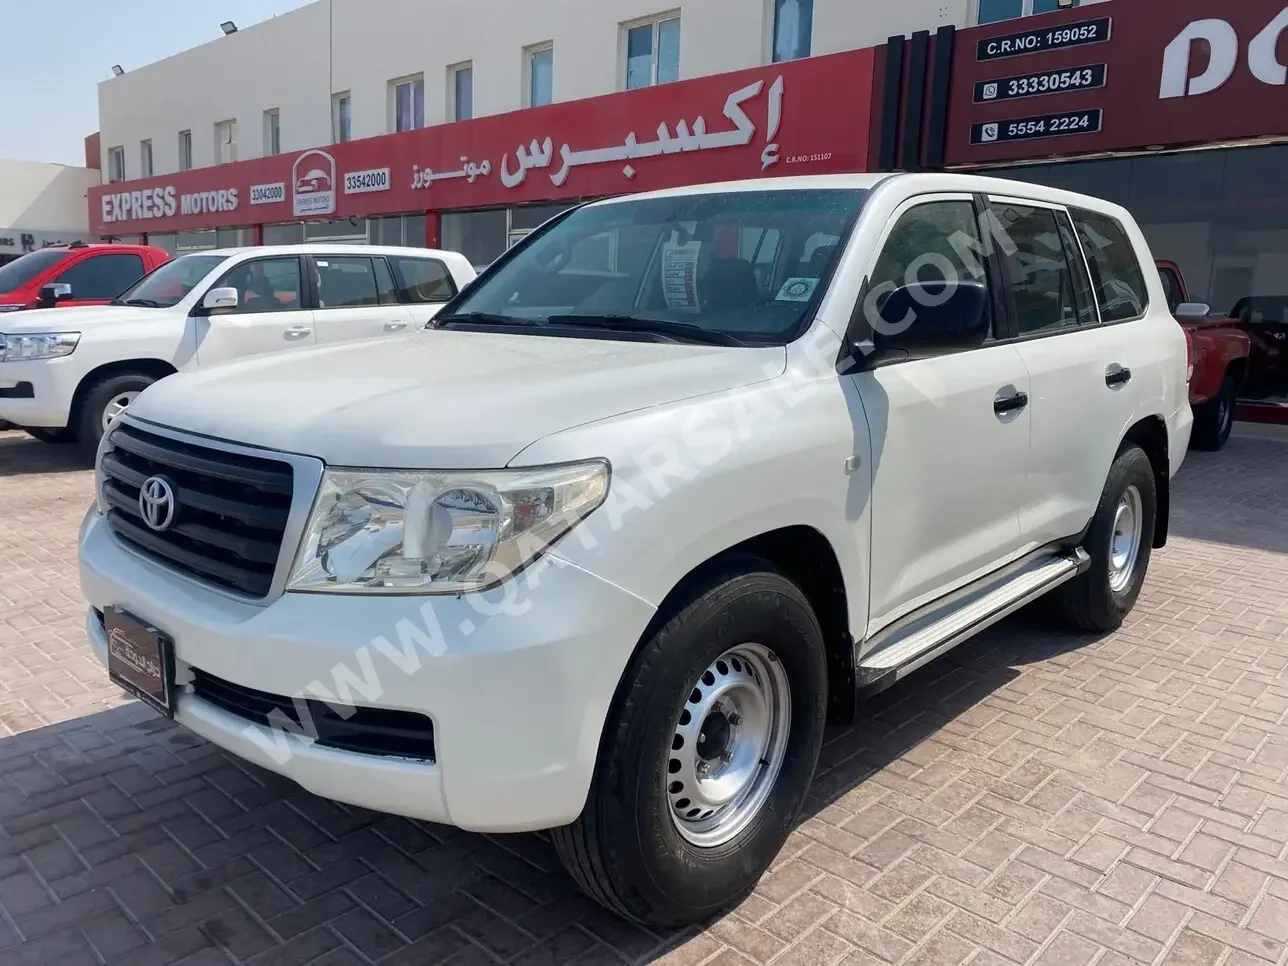 Toyota  Land Cruiser  G  2011  Automatic  472,000 Km  6 Cylinder  Four Wheel Drive (4WD)  SUV  White